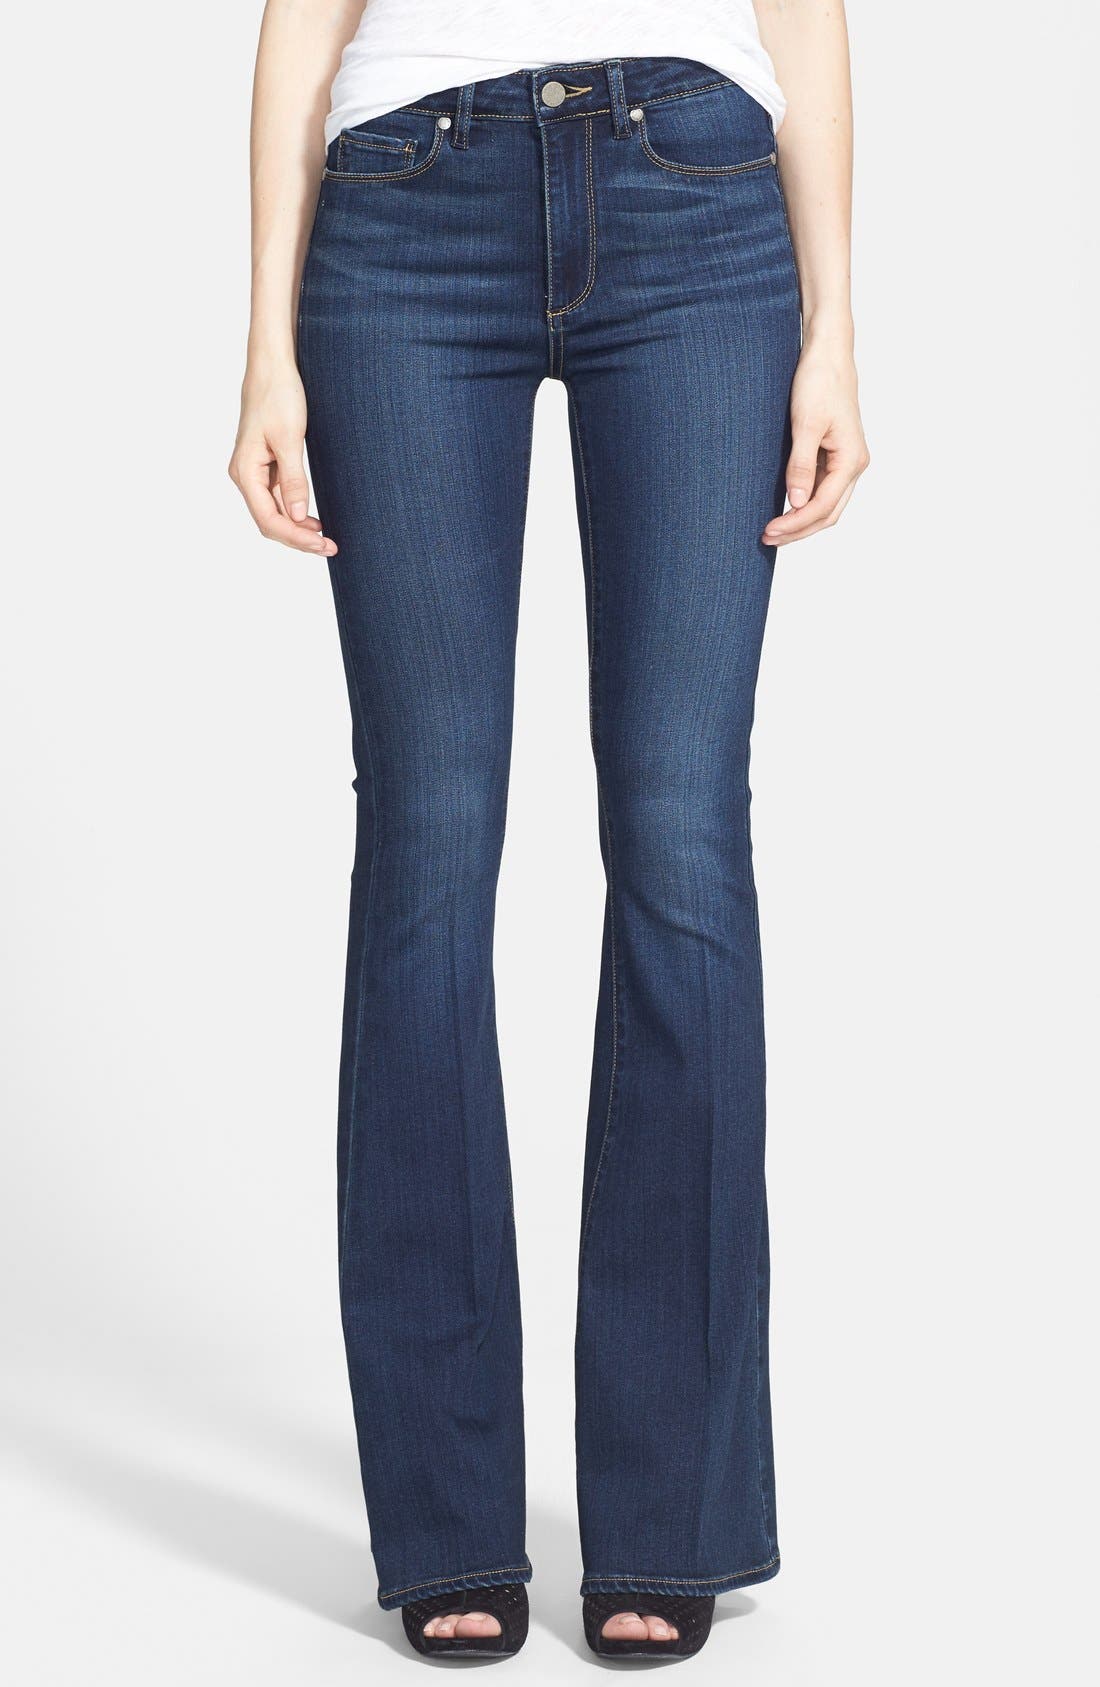 paige bell canyon jeans